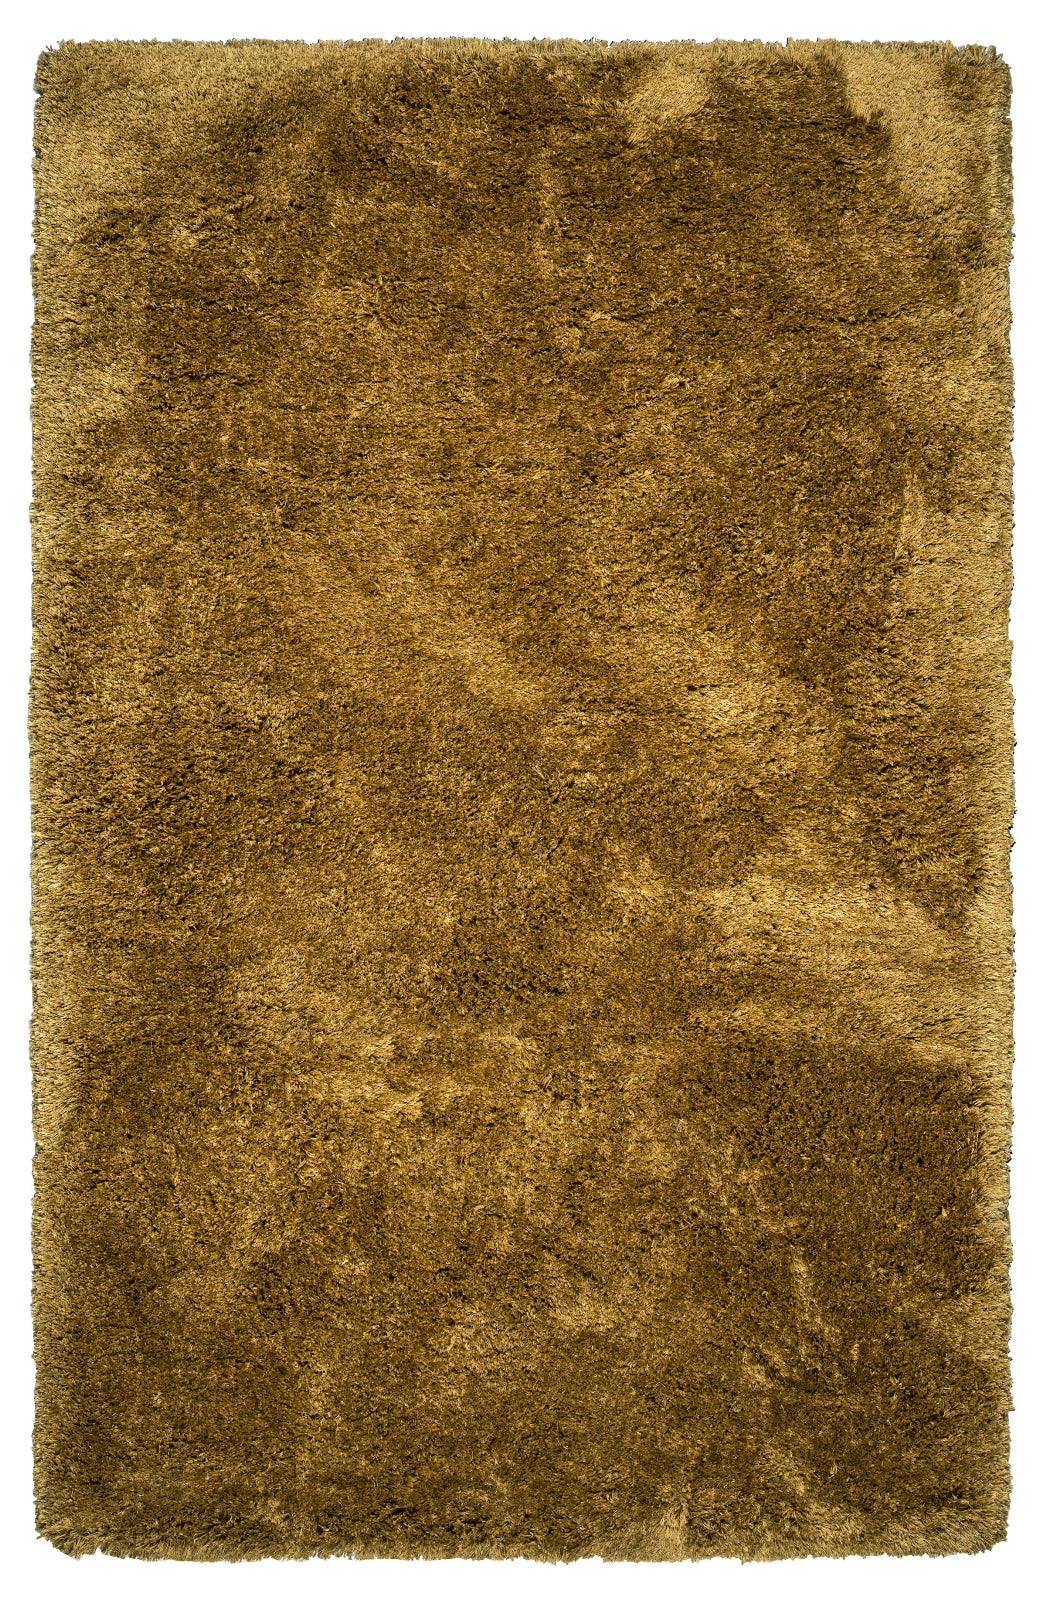 Rizzy Commons CO8421 camel Area Rug main image